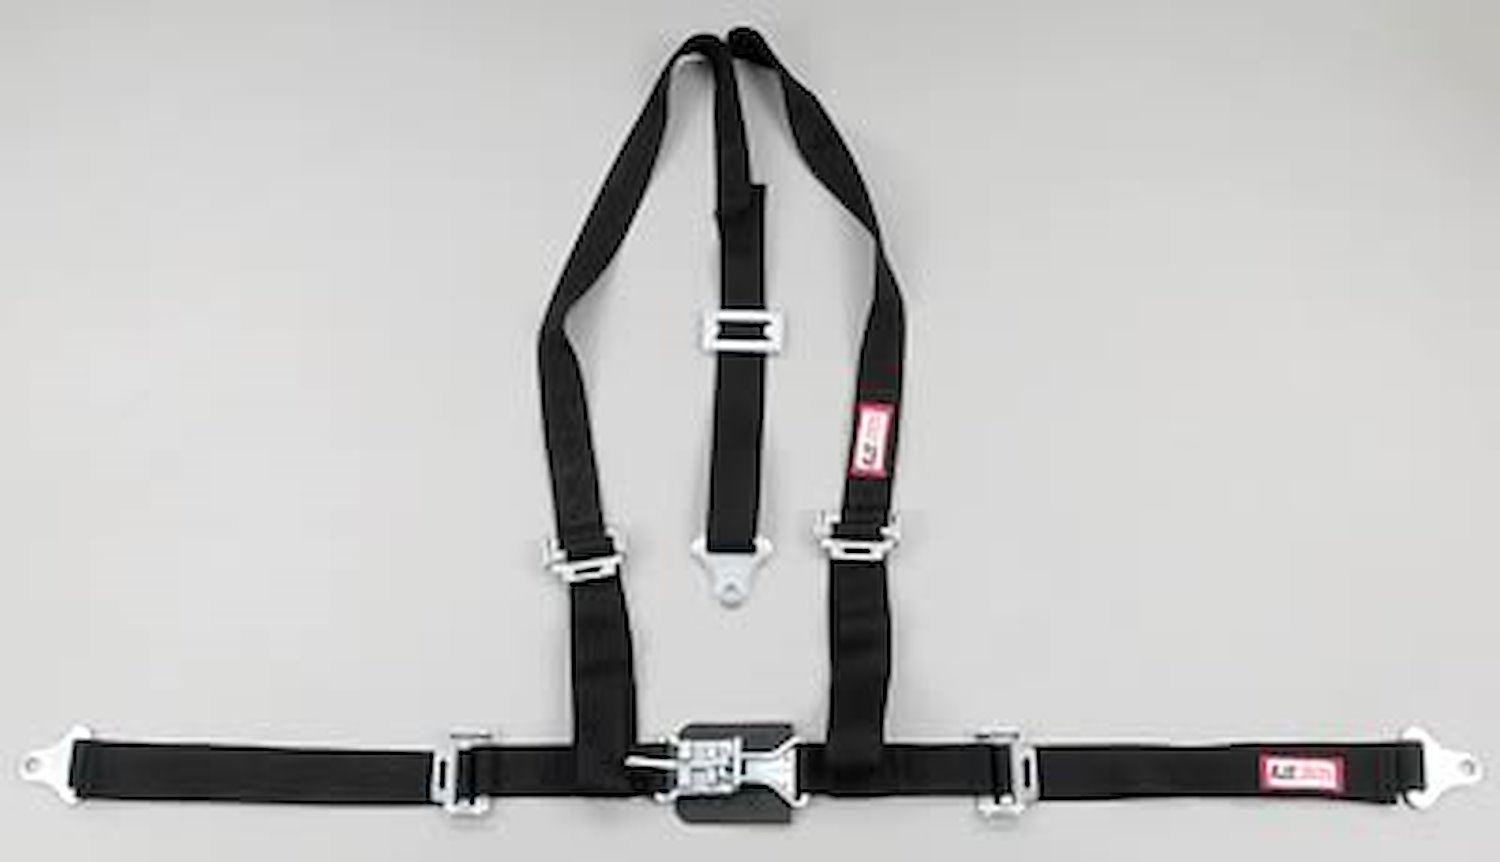 NON-SFI L&L HARNESS 3 PULL UP Lap Belt SEWN IN 2 S.H. Individual ROLL BAR Mount w/STERNUM STRAP ALL WRAP ENDS GRAY